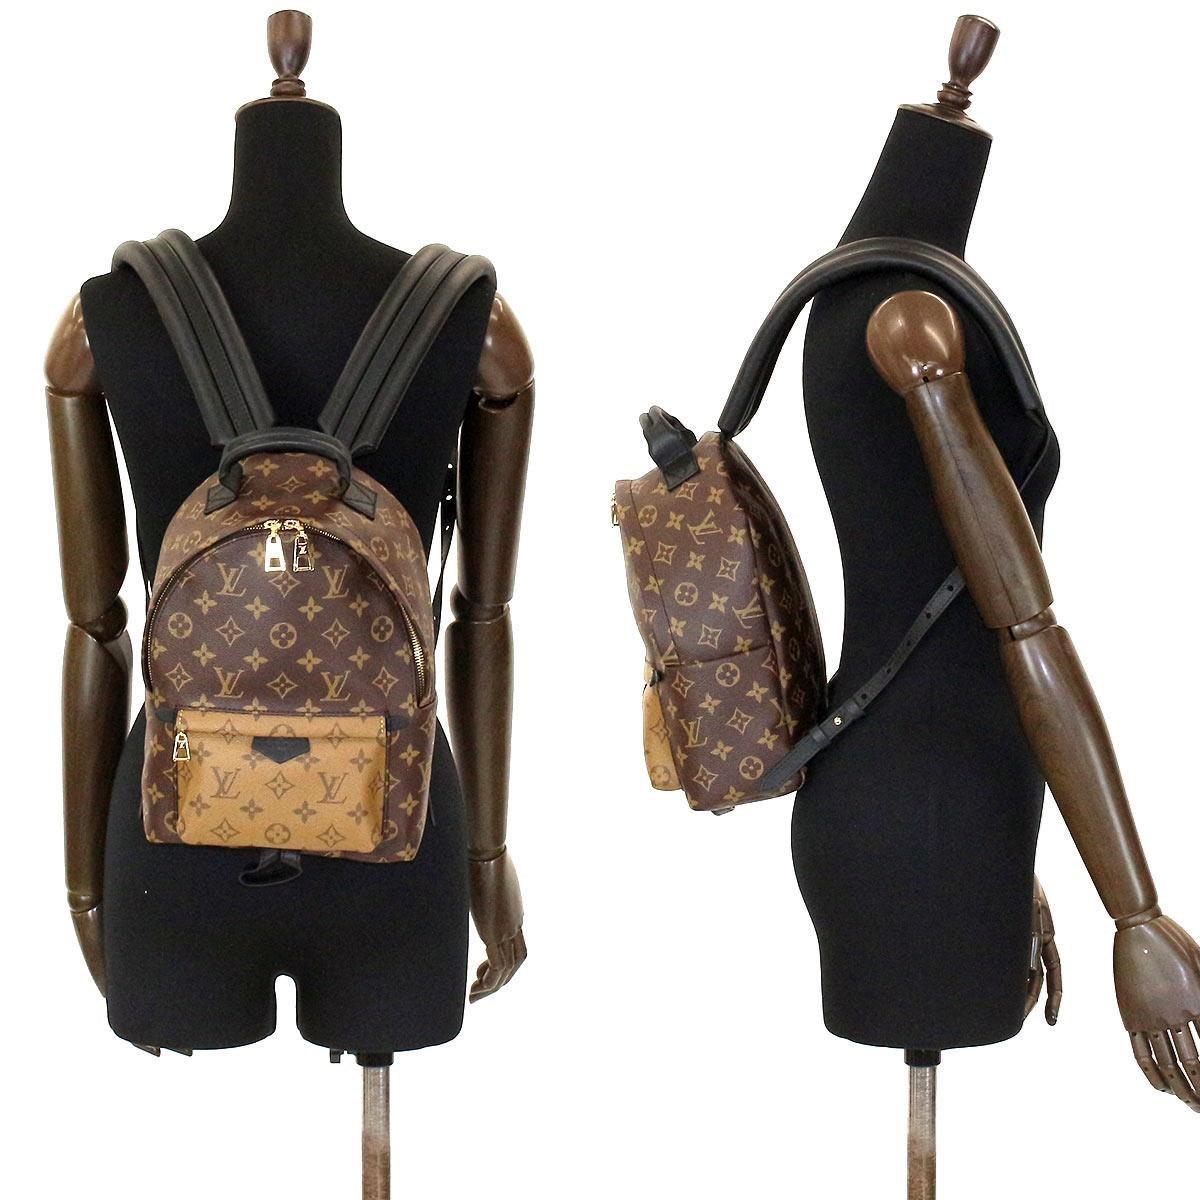 Lyst - Louis Vuitton Palm Springs Back Pack Pm Monogram Reverse M43116 in Brown